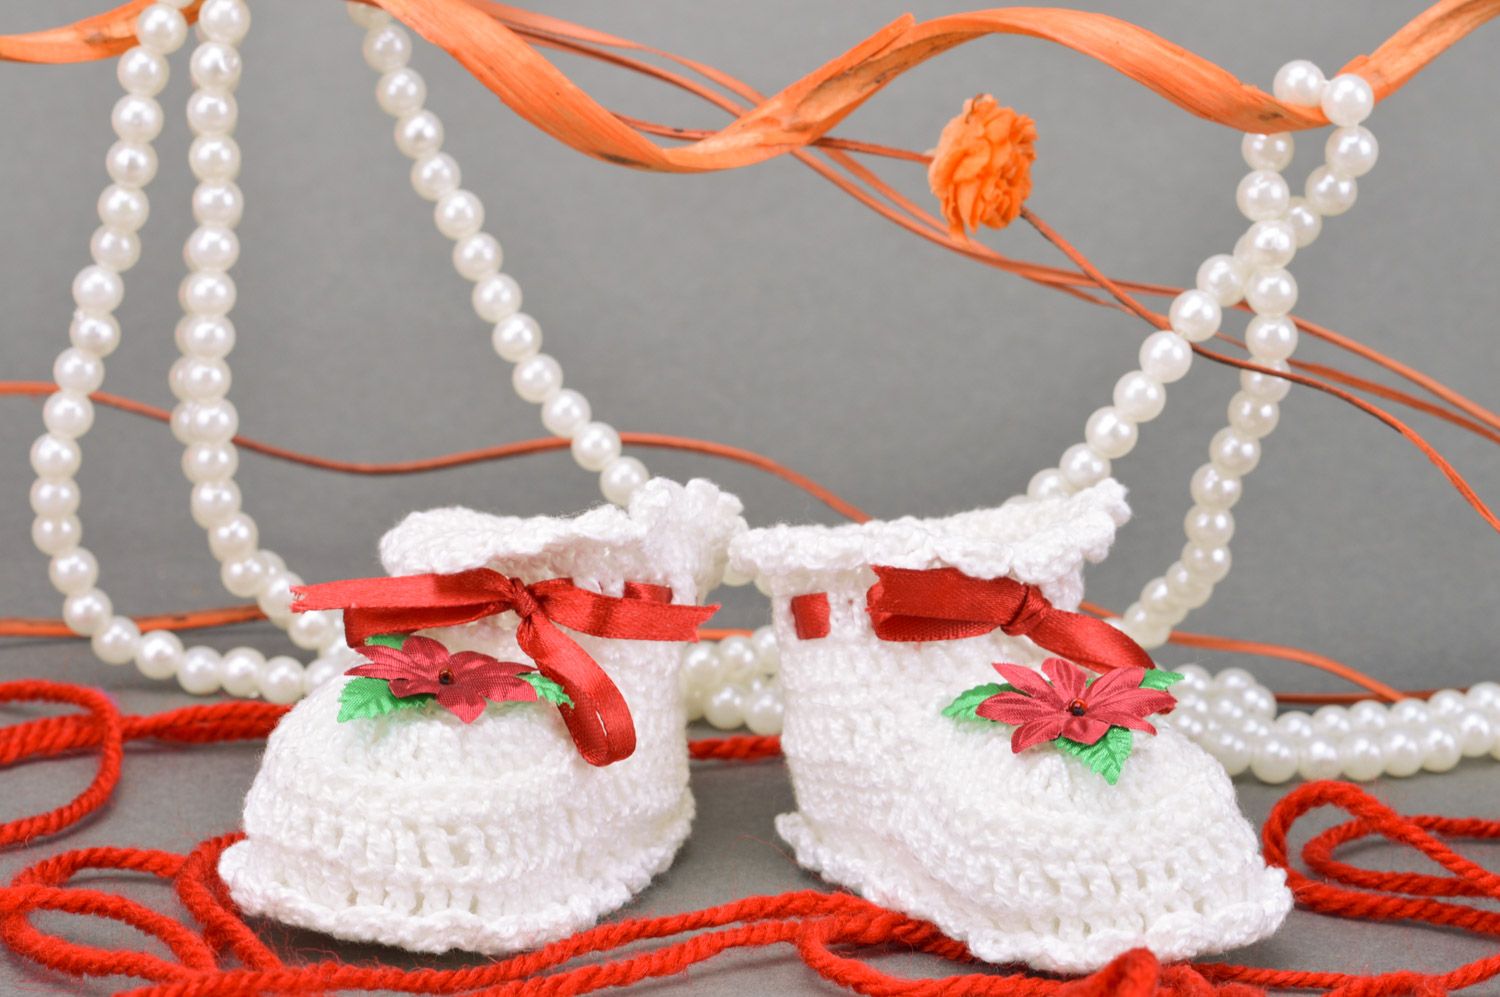 Handmade crocheted white baby booties made of cotton with a flower for a baby girl photo 1